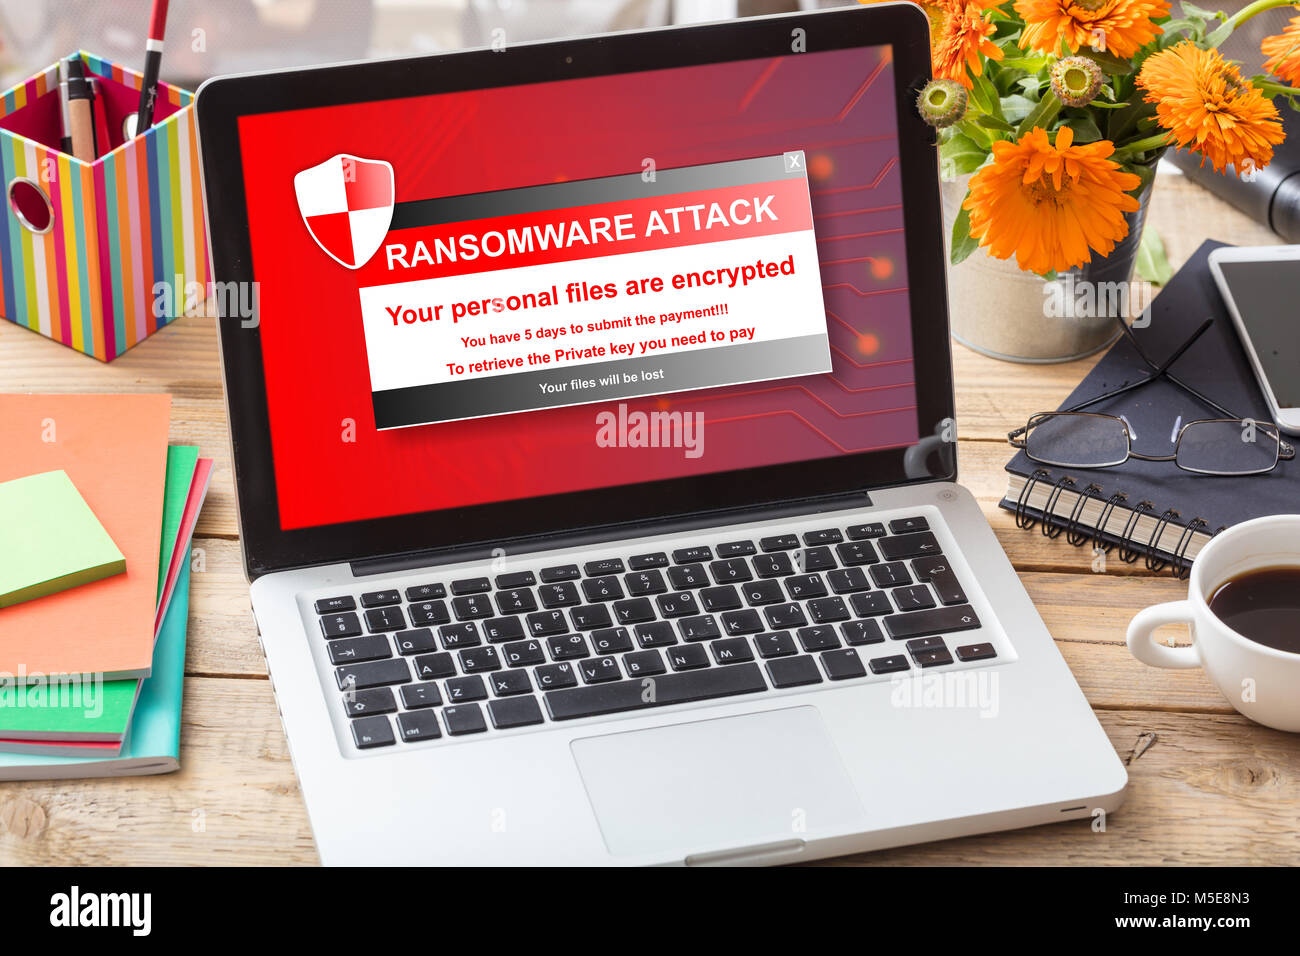 Ransomware attack message on a computer screen on a wooden office desk Stock Photo